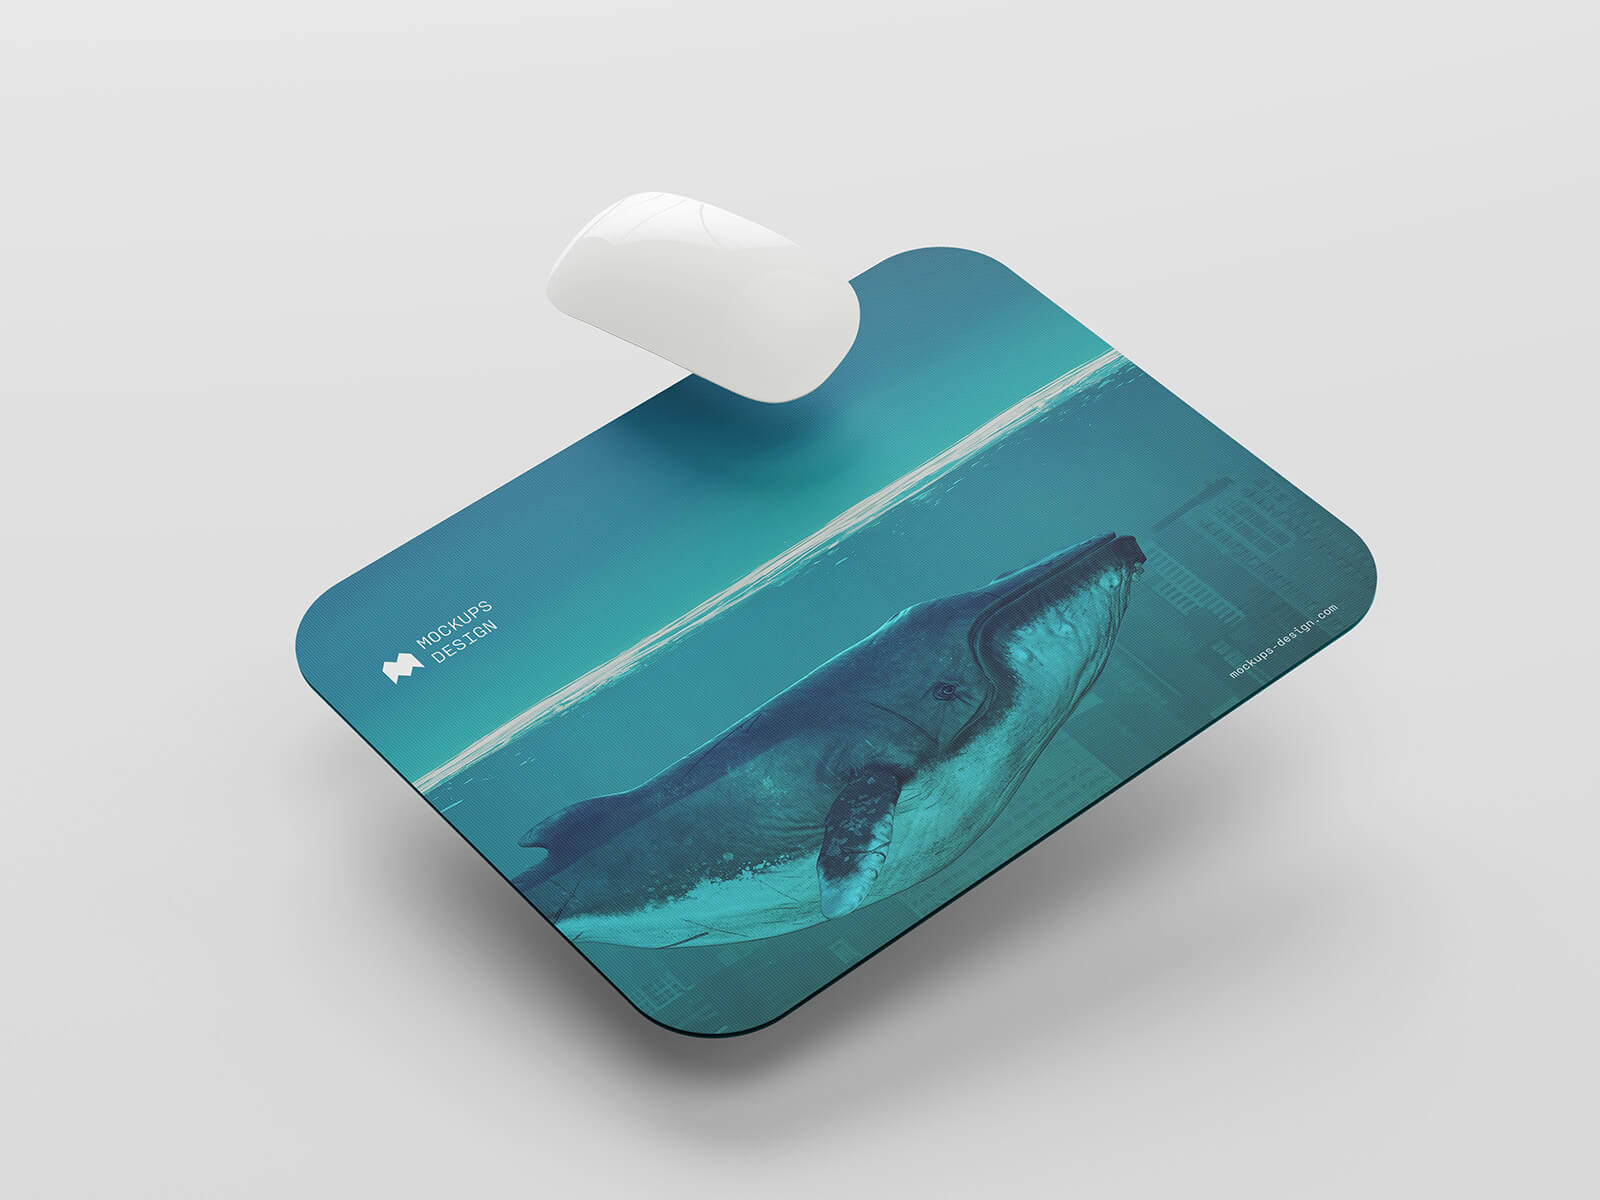 3 Free Rounded Rectangle Mousepad Mockup PSD Files